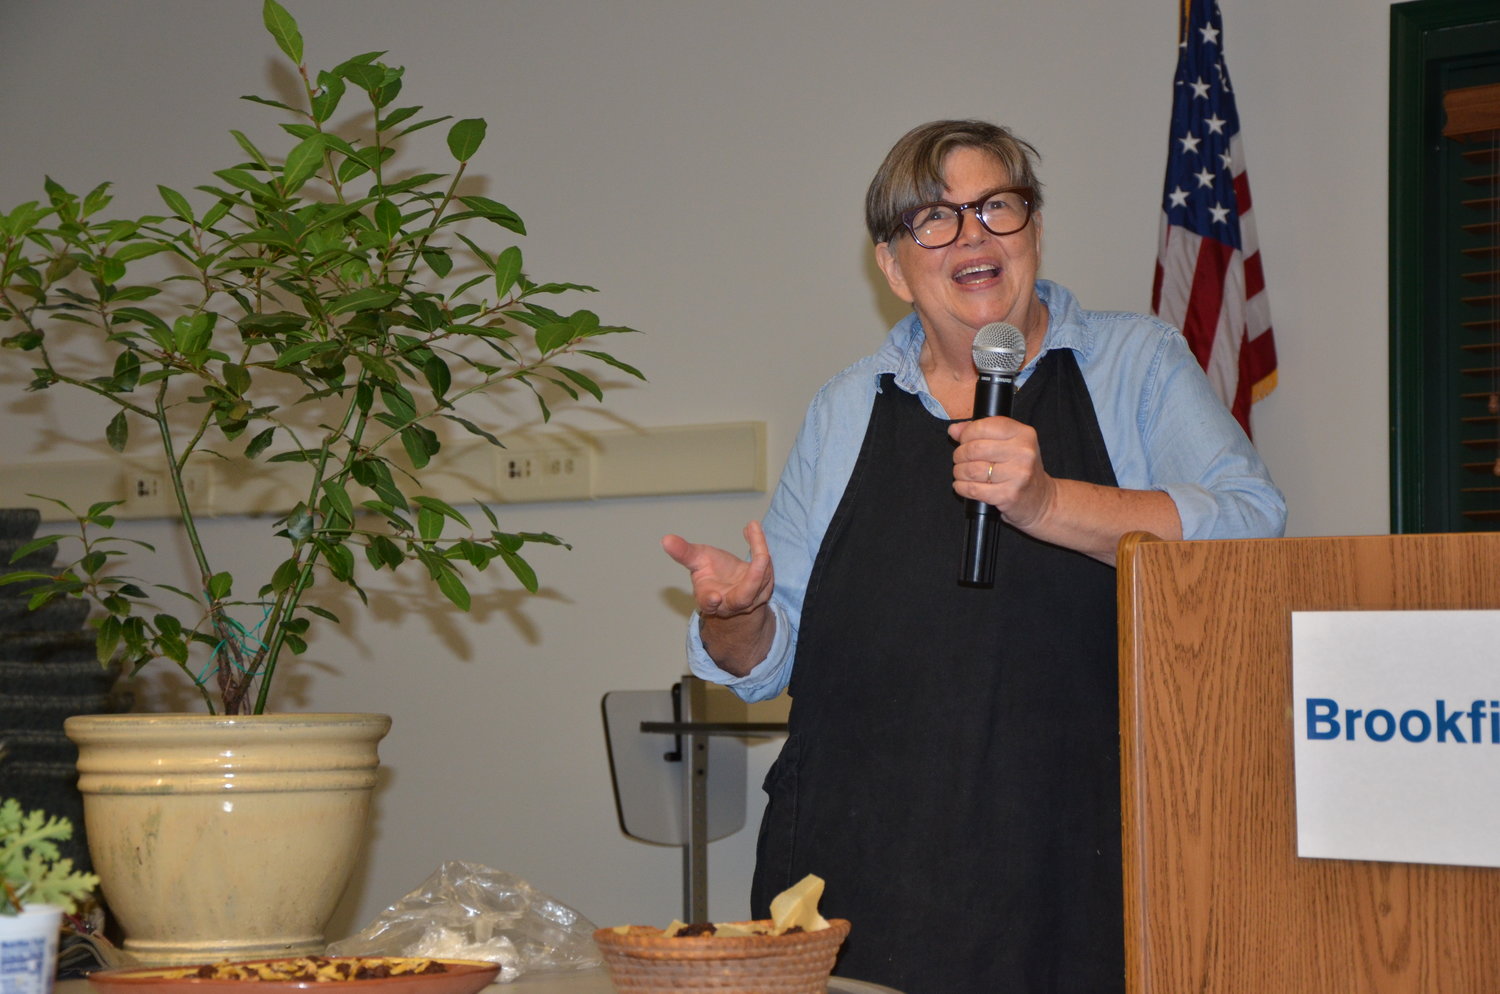 Guest speaker Marcia Dunsmore specializes in breads and desserts—baking with garden herbs.